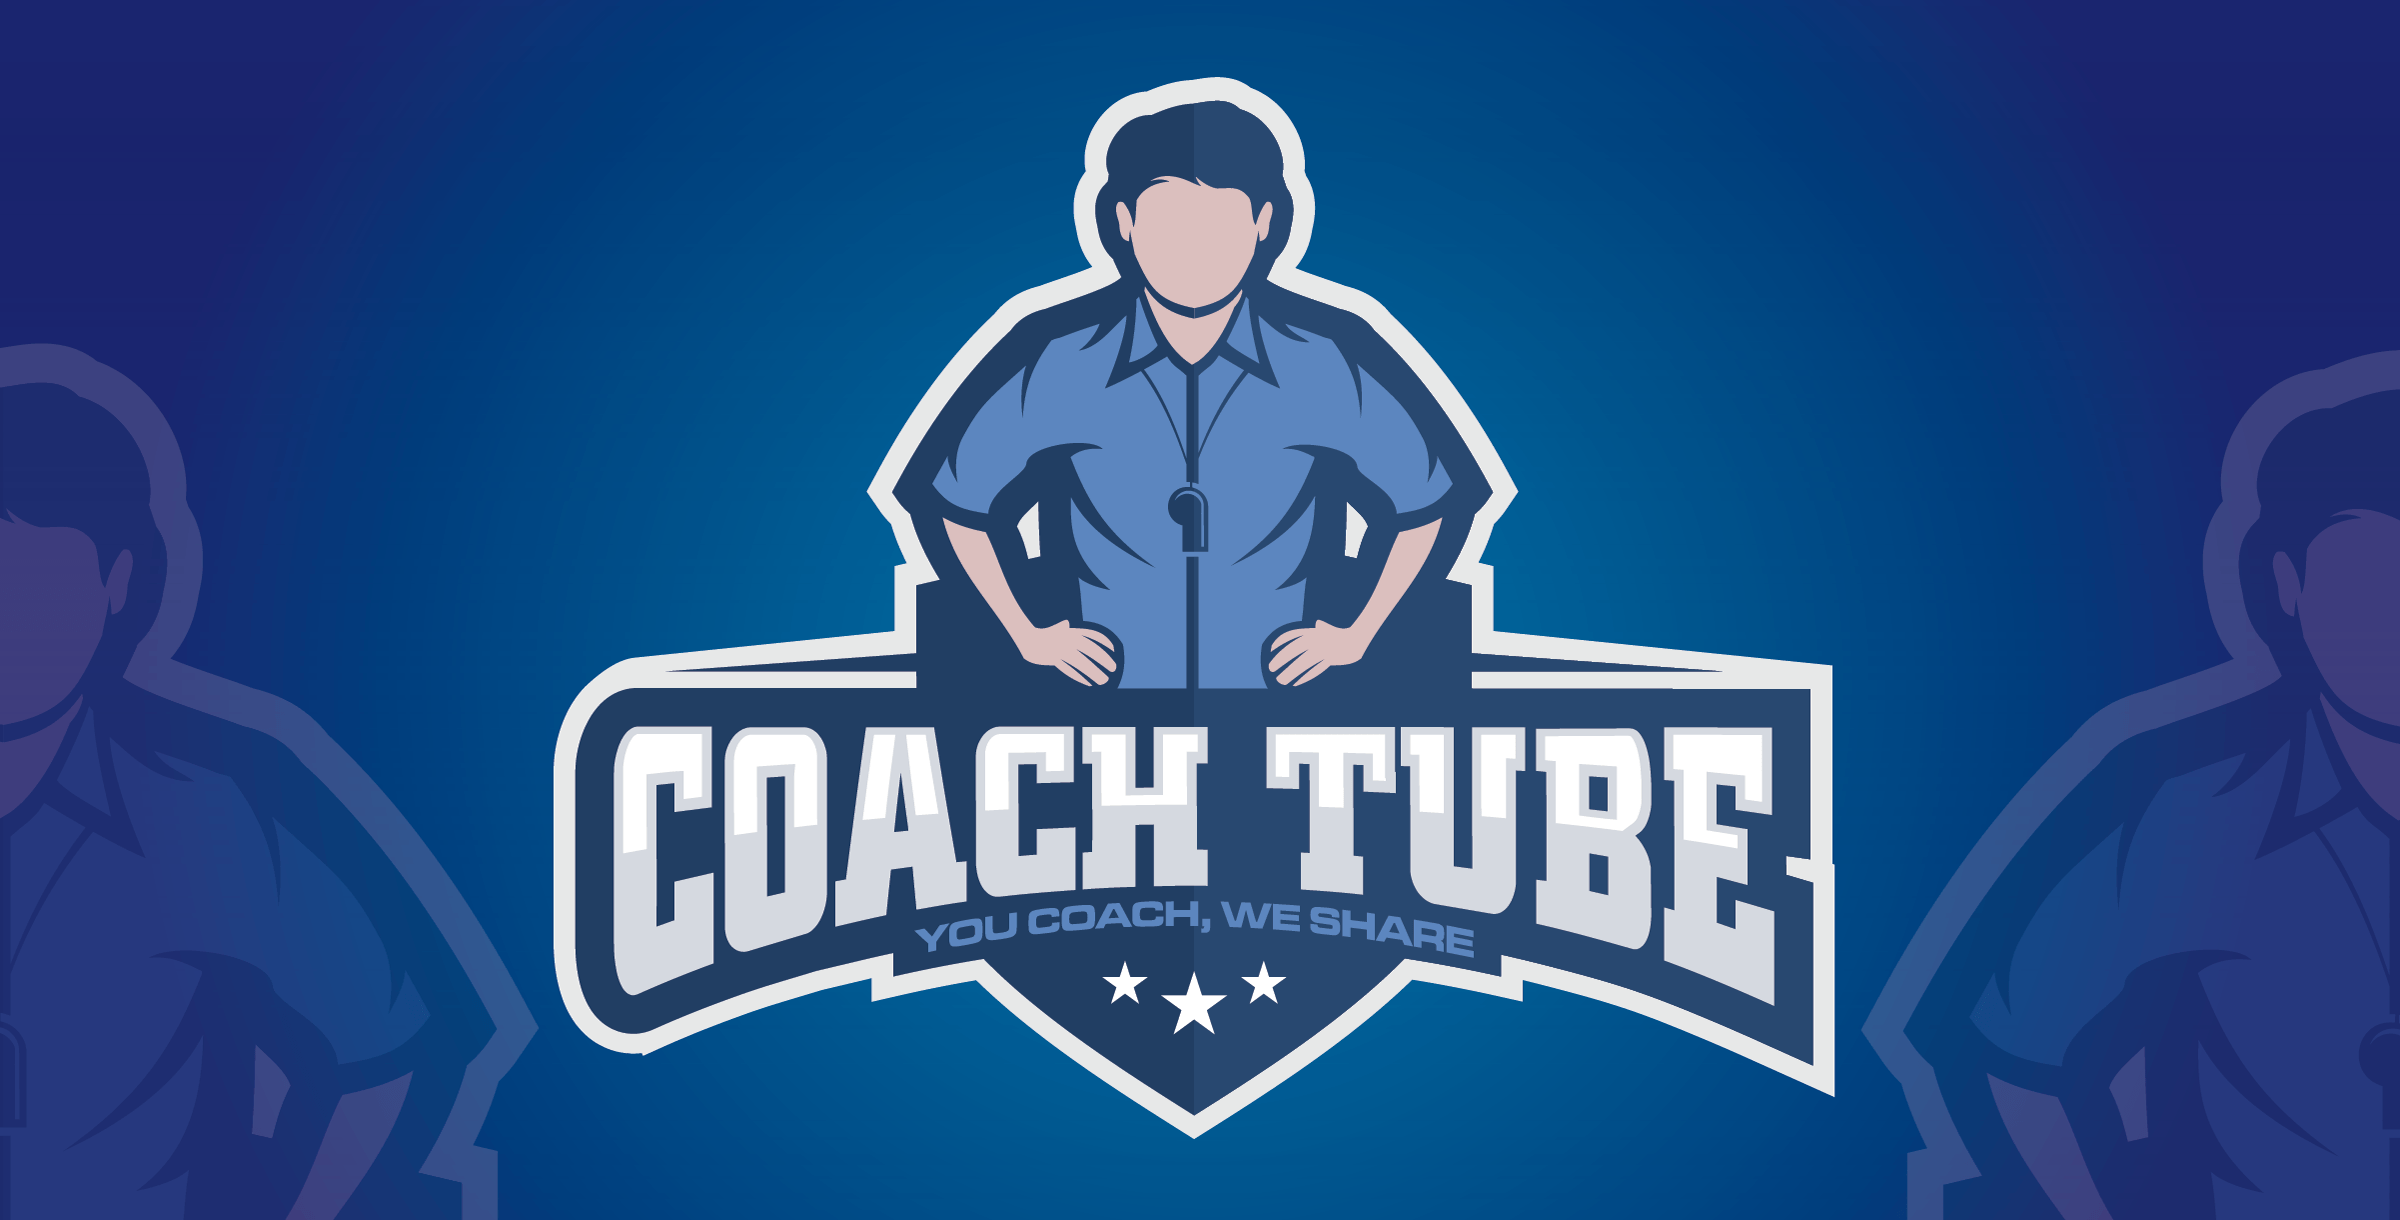 Coaches Logo - Instructional Coaching Videos - Online Courses - How to Coach